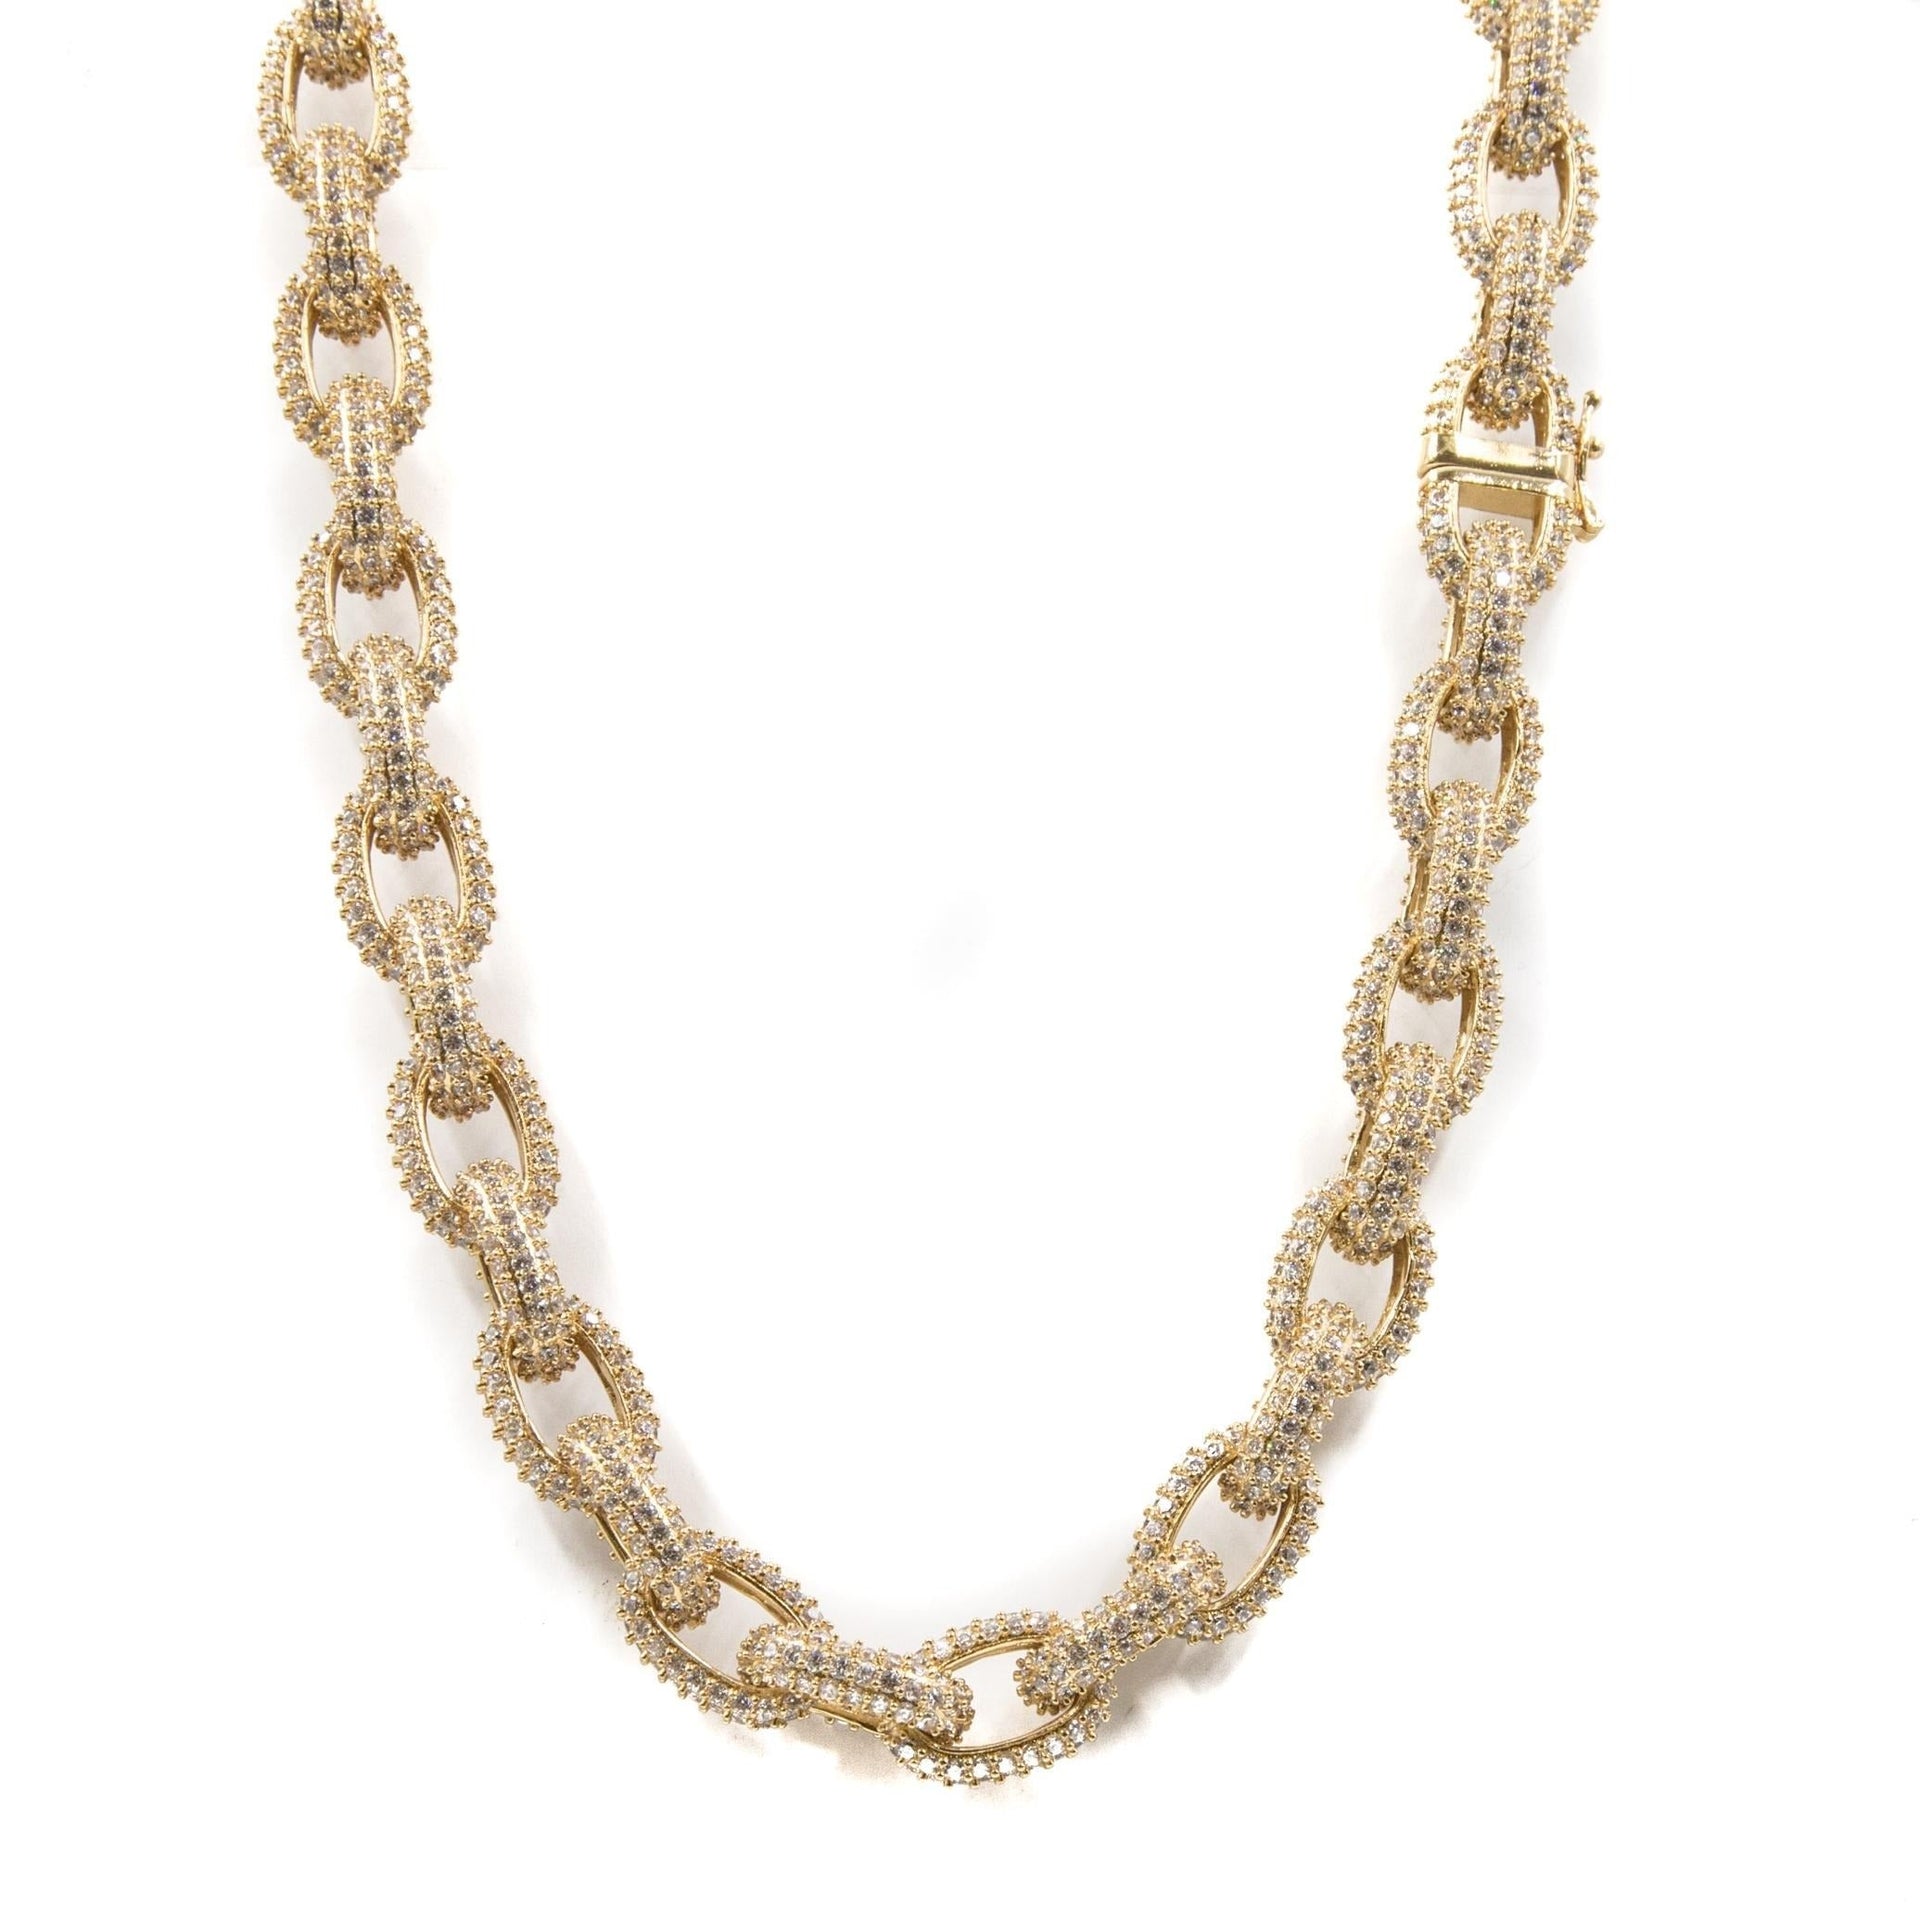 GOLDEN GILT | CHAIN LINK NECKLACE | 18K GOLD PLATED | 20"